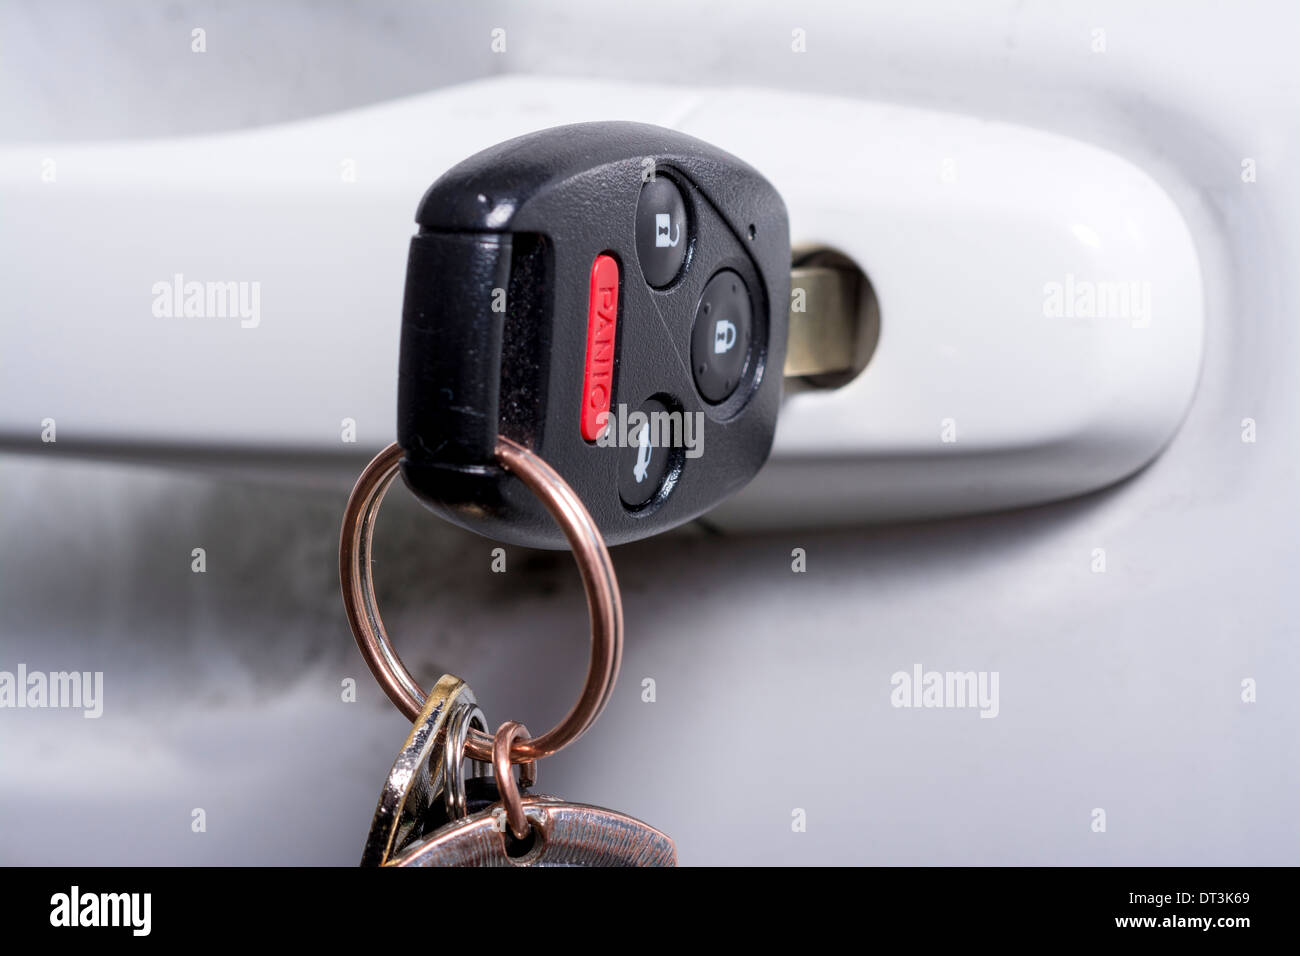 Key Fob inserted into a car door handle Stock Photo